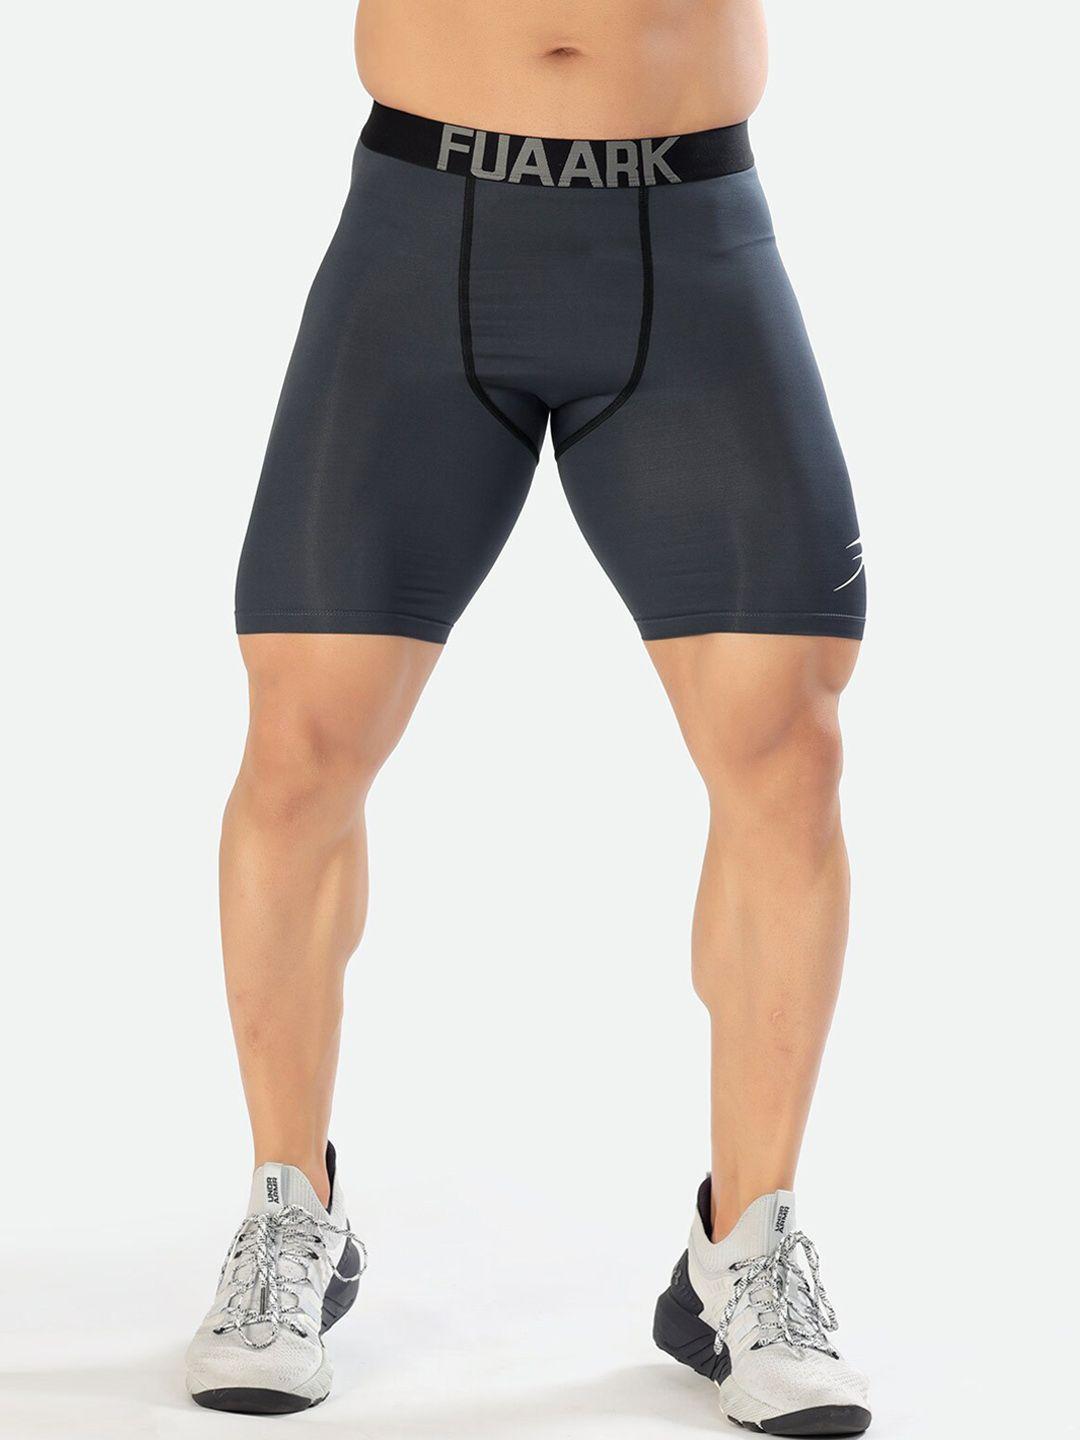 fuaark-men-grey-skinny-fit-high-rise-training-or-gym-sports-shorts-with-antimicrobial-technology